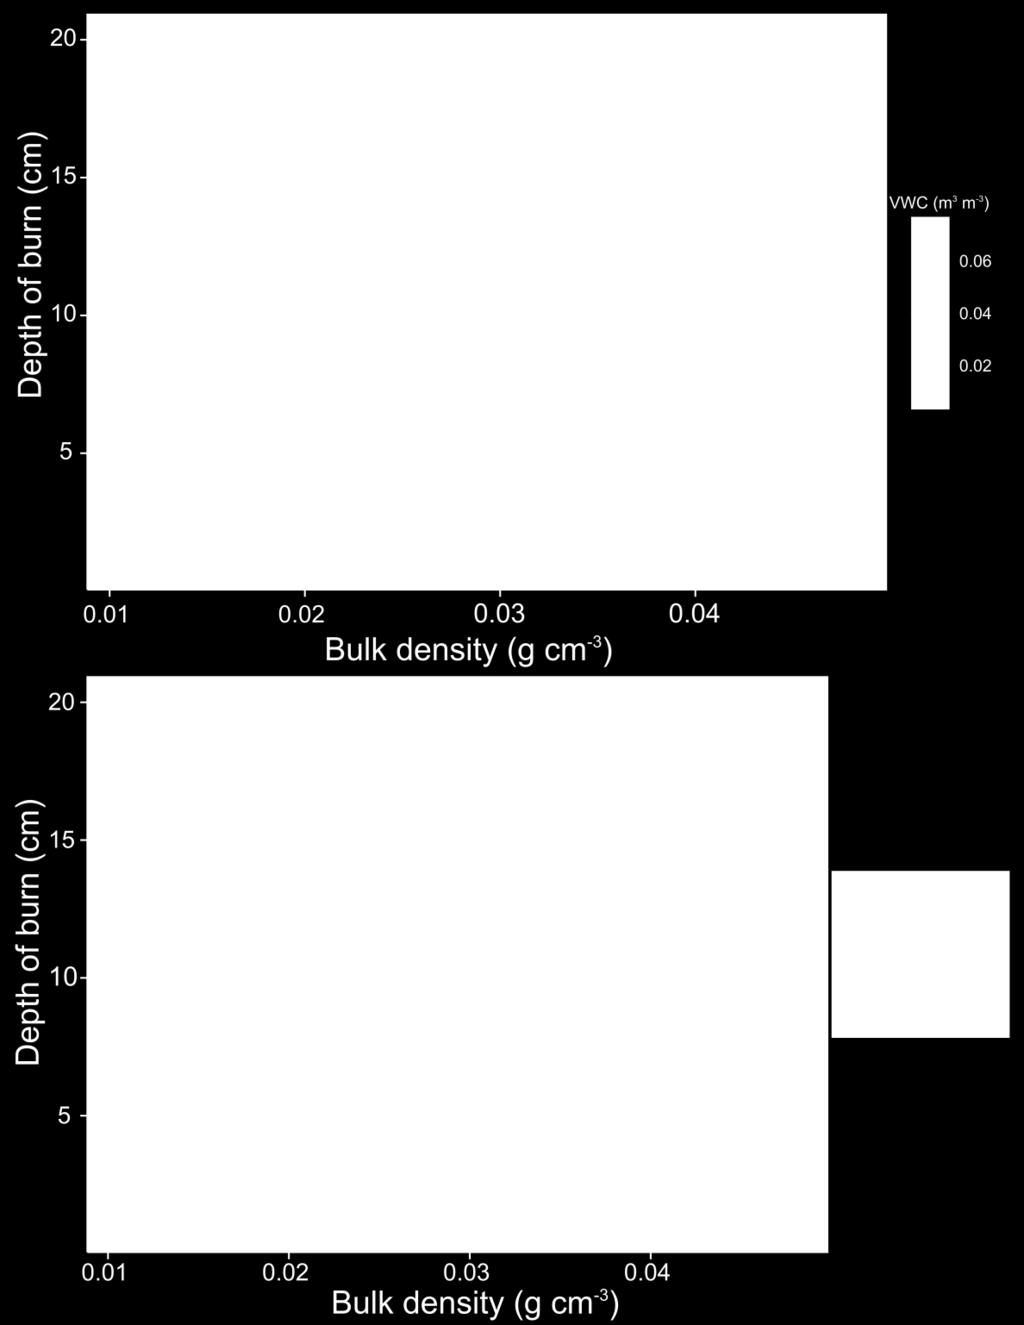 Figure 4. A: The effect of bulk density on depth of burn in peat during combustion. Point colour corresponds to variation in volumetric water content (VWC) prior to combustion.